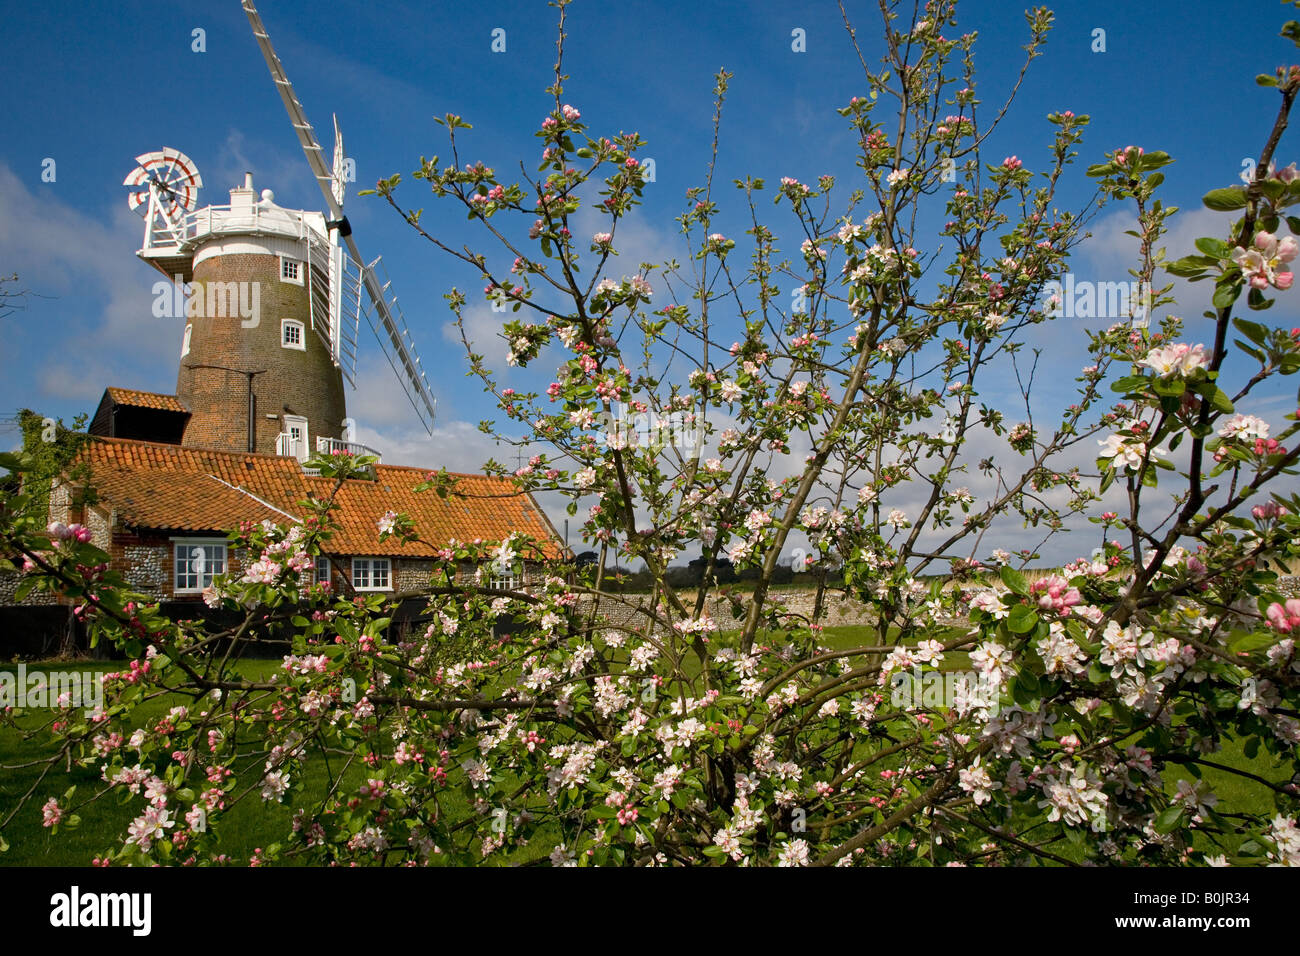 Cley Village and Windmill on the North Norfolk Coast England in Spring with apple blossom Stock Photo